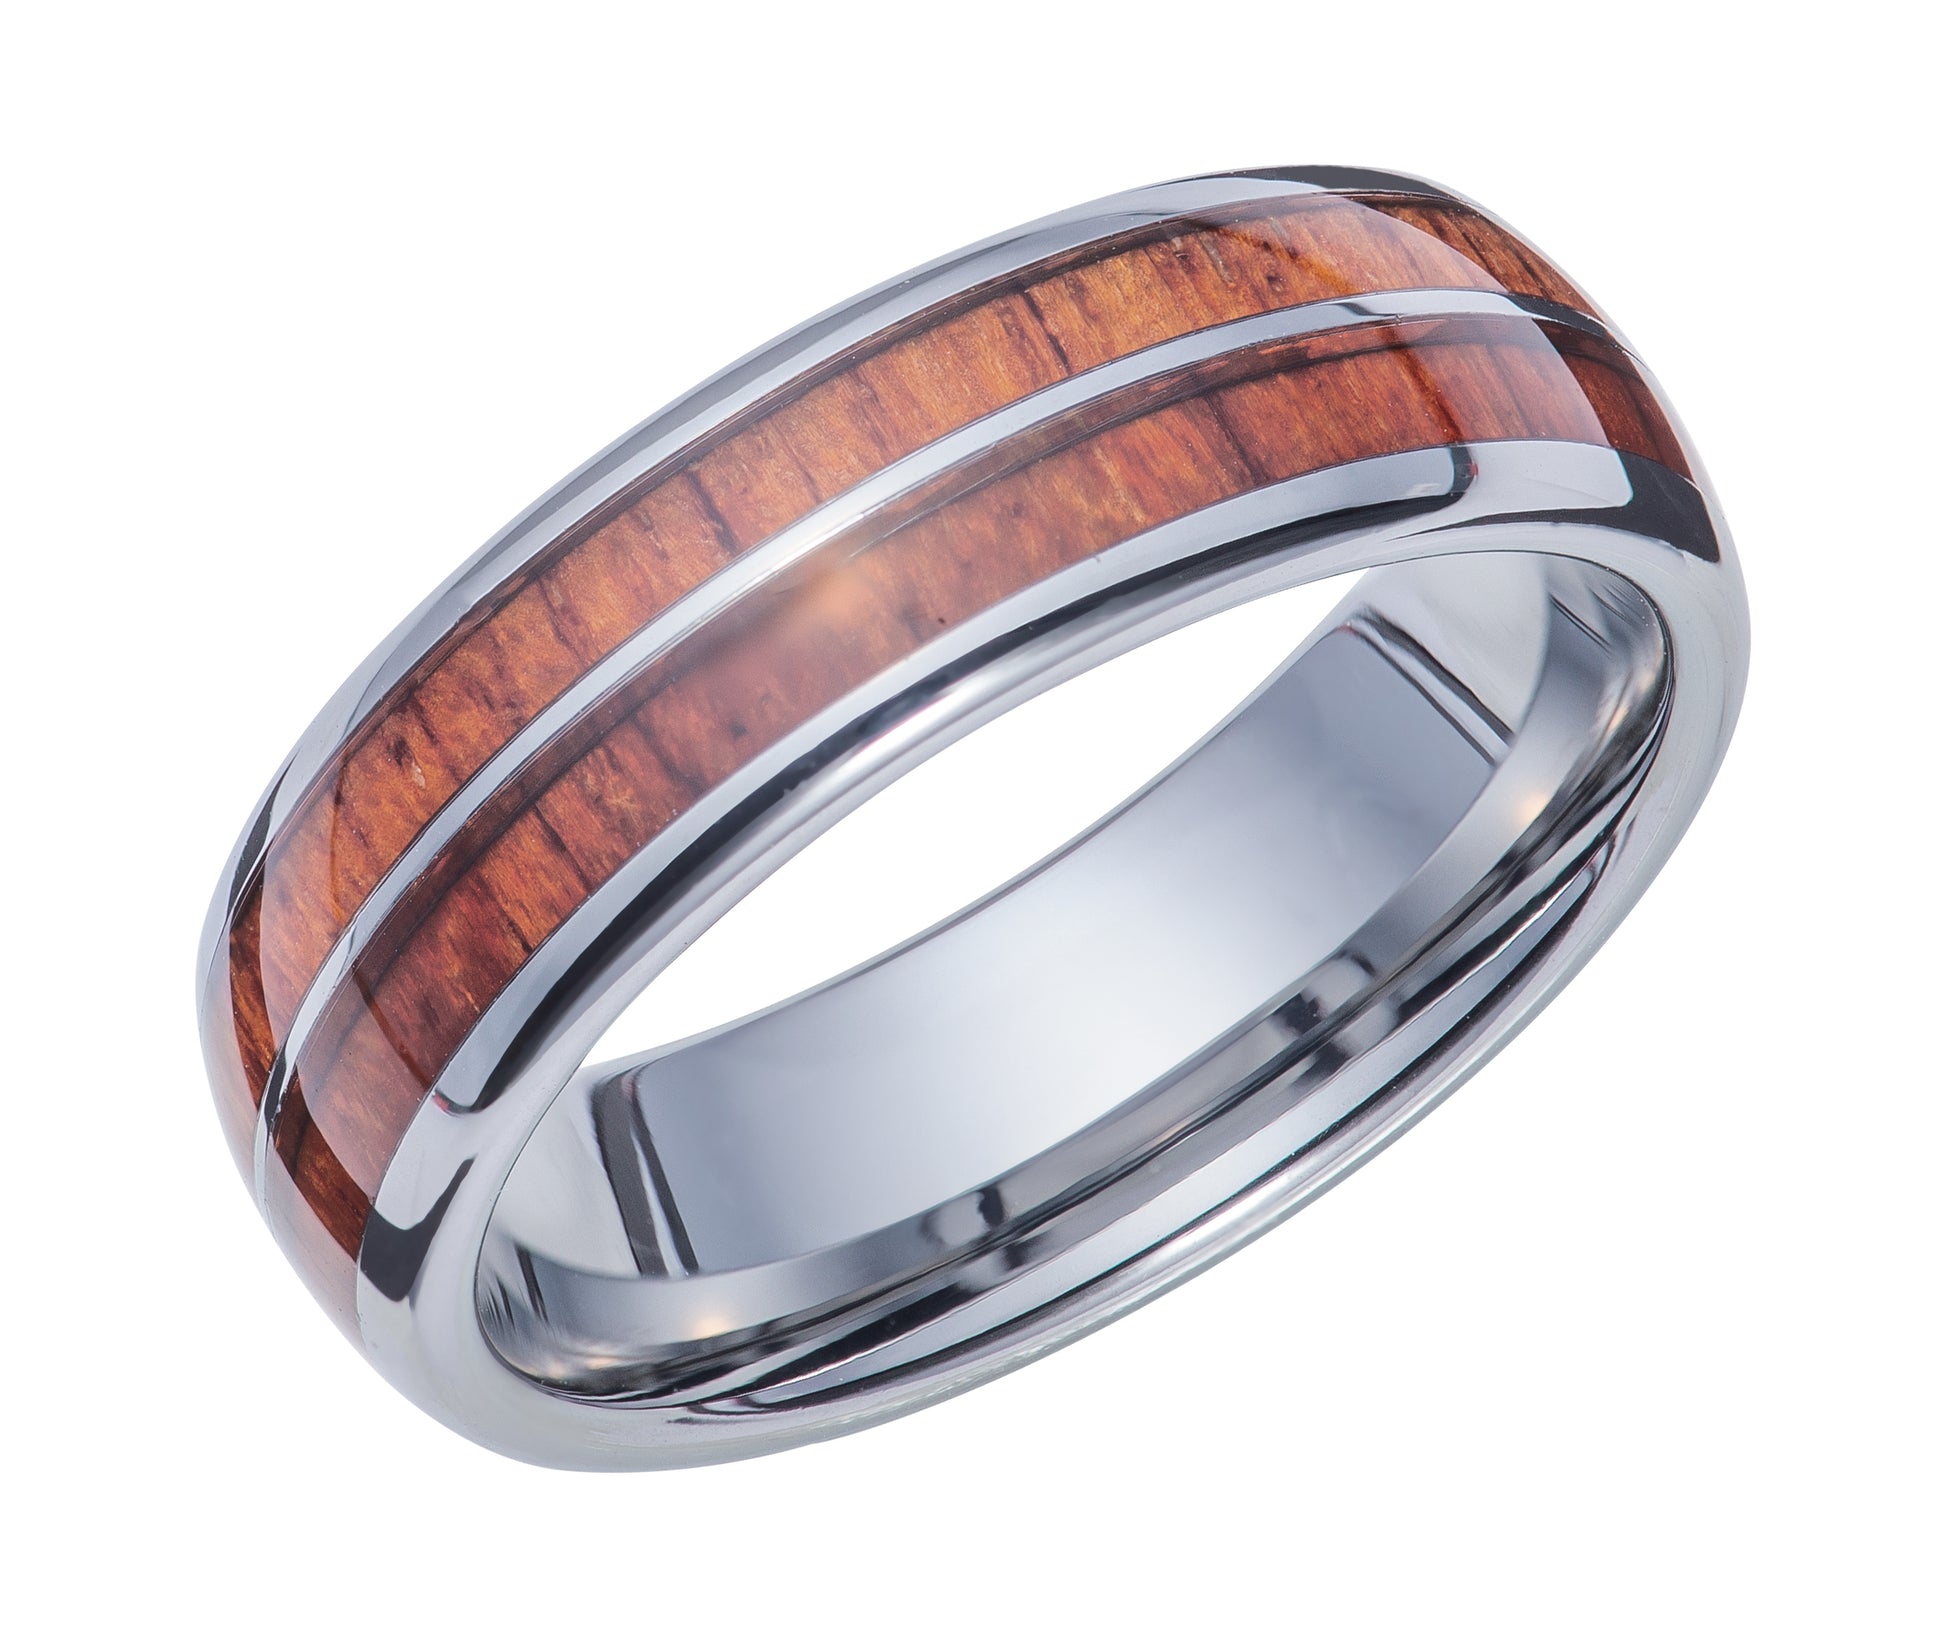 Tungsten Carbide Wedding Band with Wood Inlay